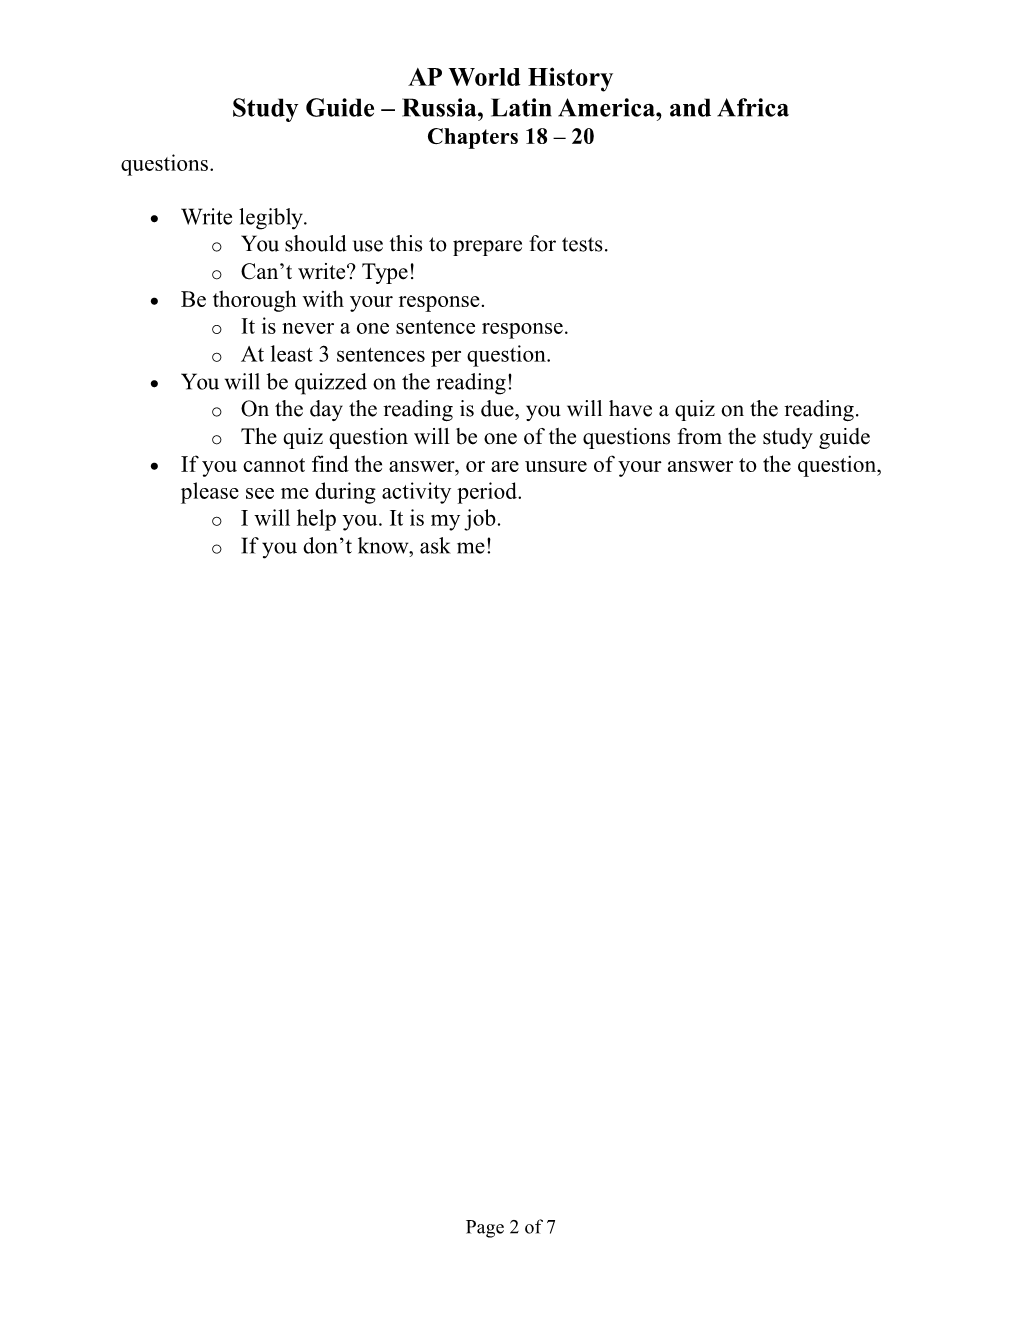 These Questions Are Based on Class Discussions and Material, Reading from Chapters 1-7